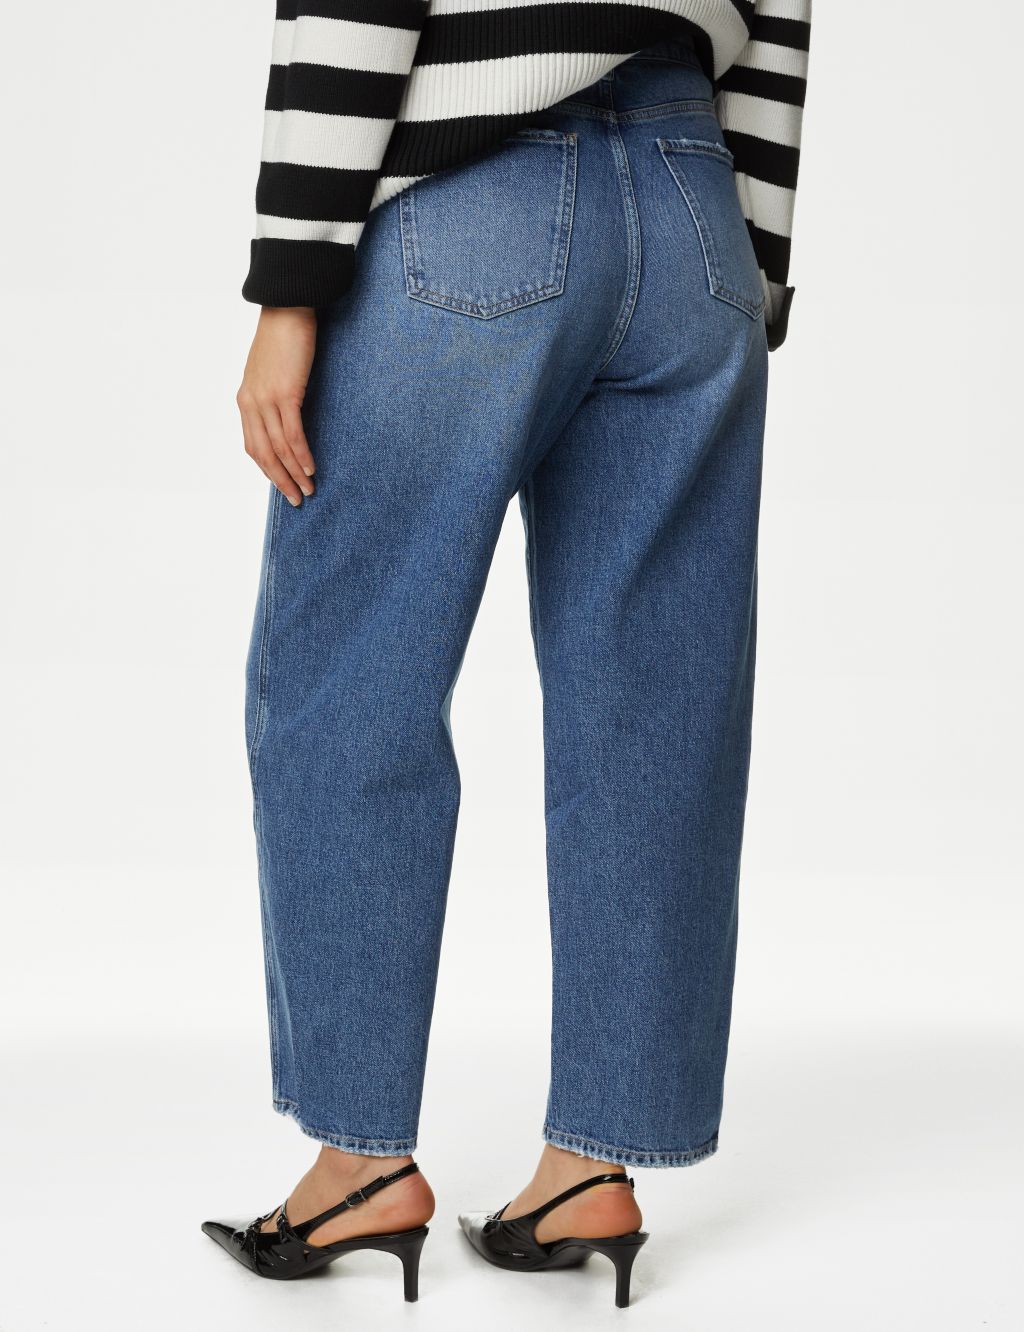 Carrot-Leg Jeans Are the Latest Denim Trend to Add Your Closet - ASADA Group